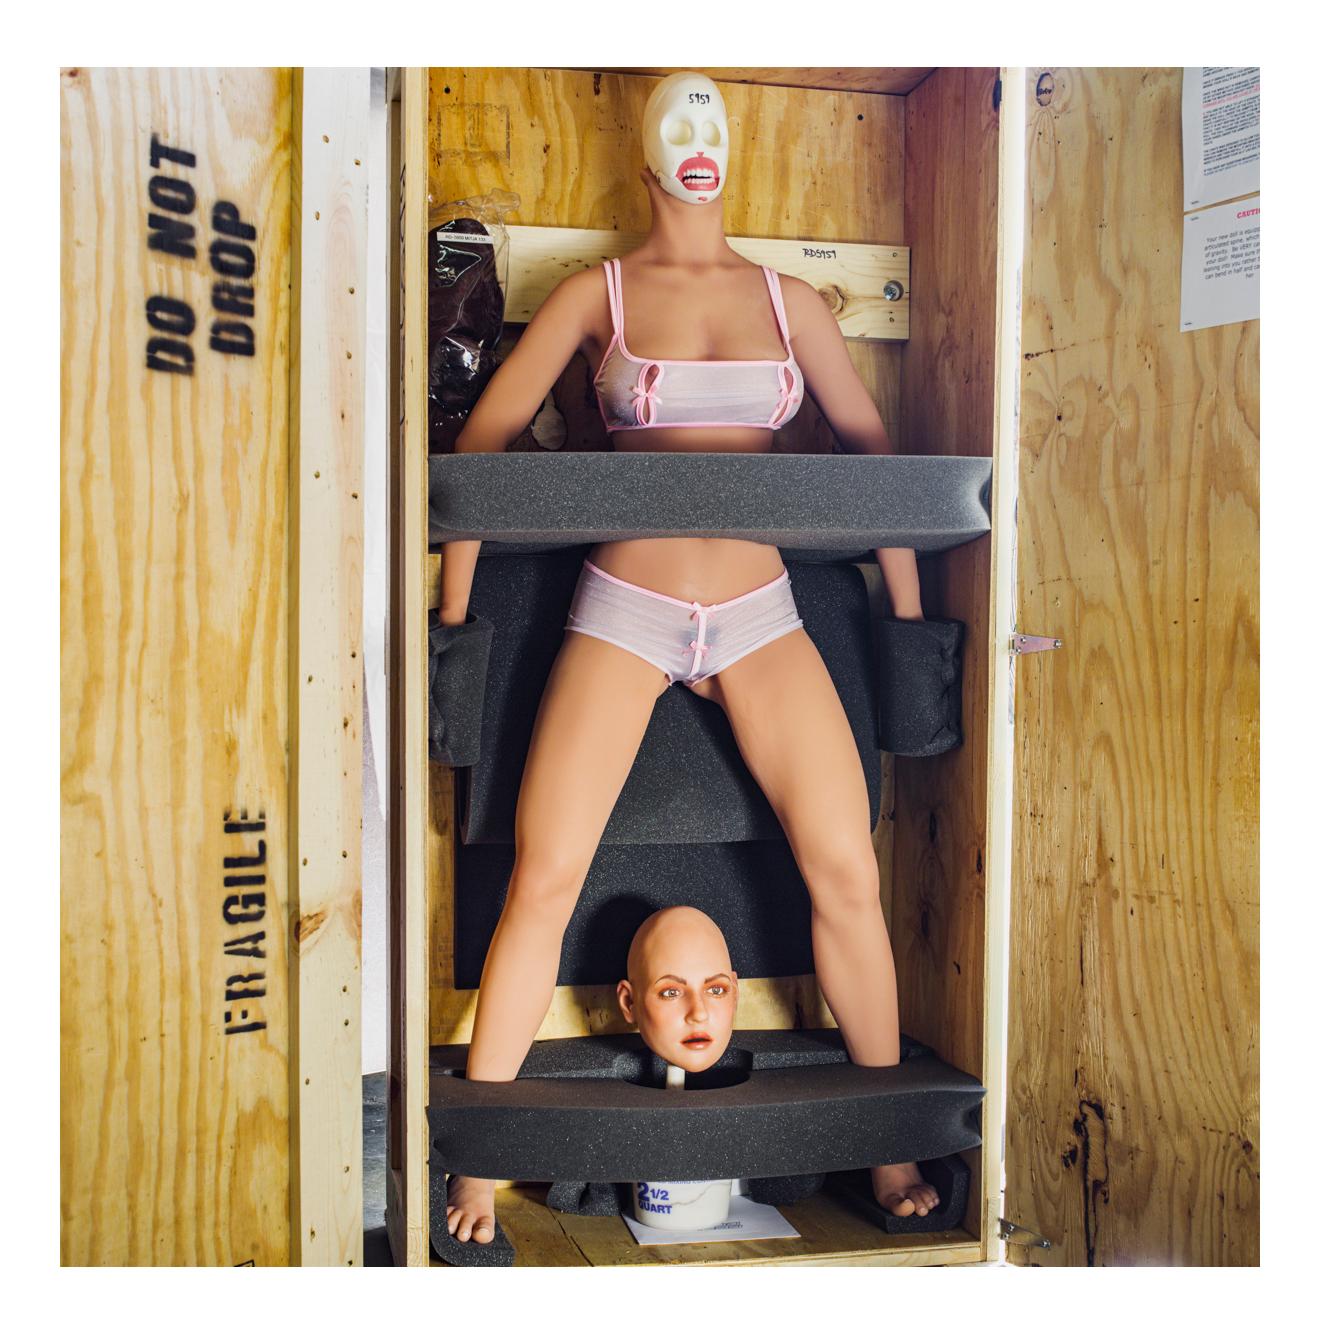 Jonathan Becker Nude Photograph - At the Real Dolls Factory, San Diego, 19 February 2015